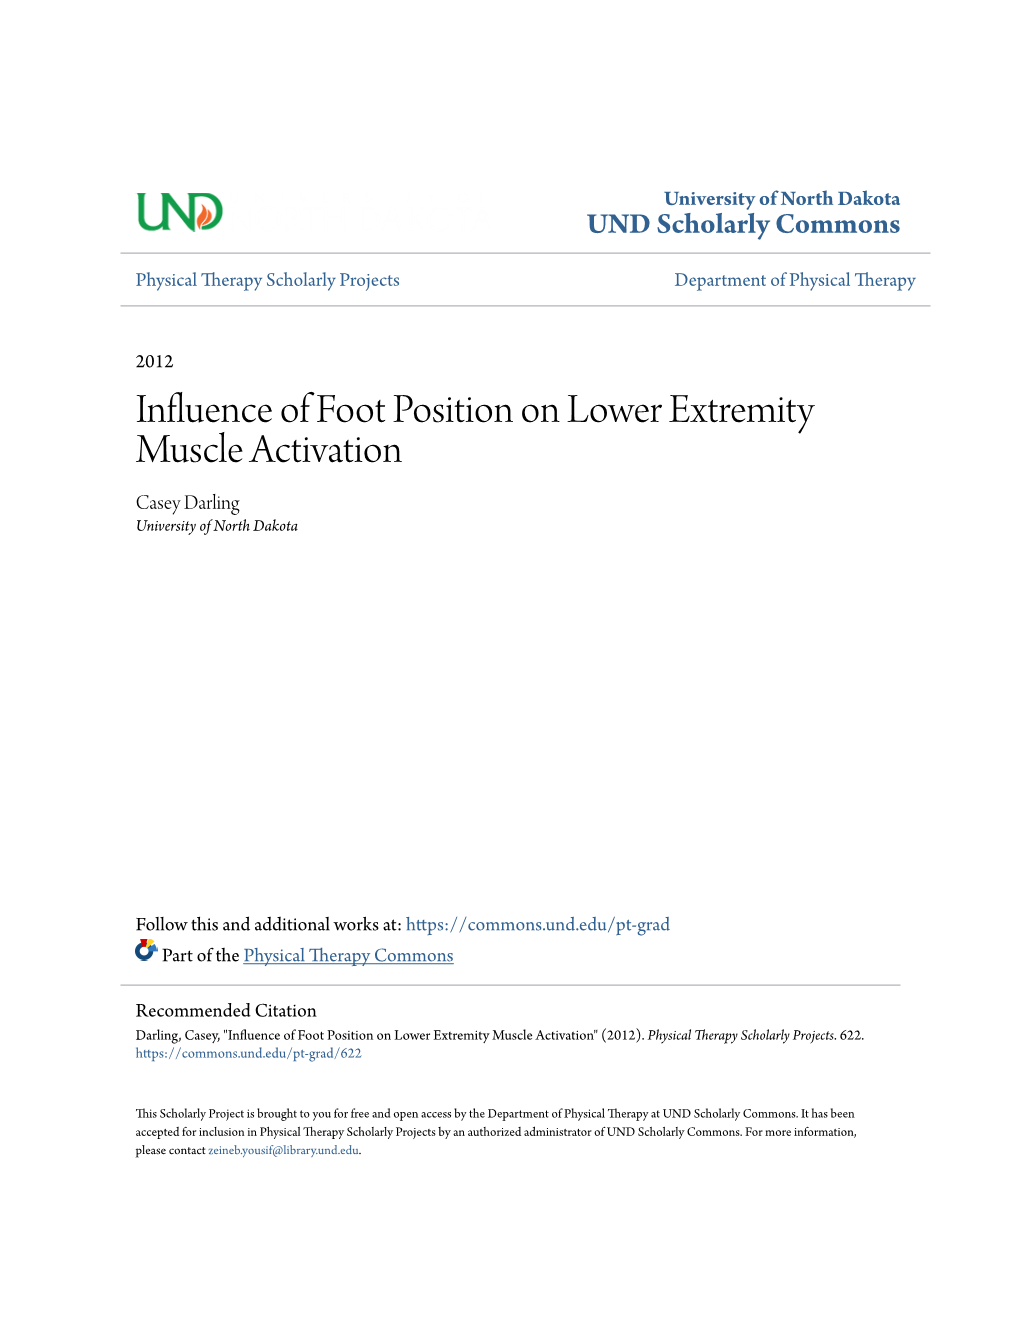 Influence of Foot Position on Lower Extremity Muscle Activation Casey Darling University of North Dakota